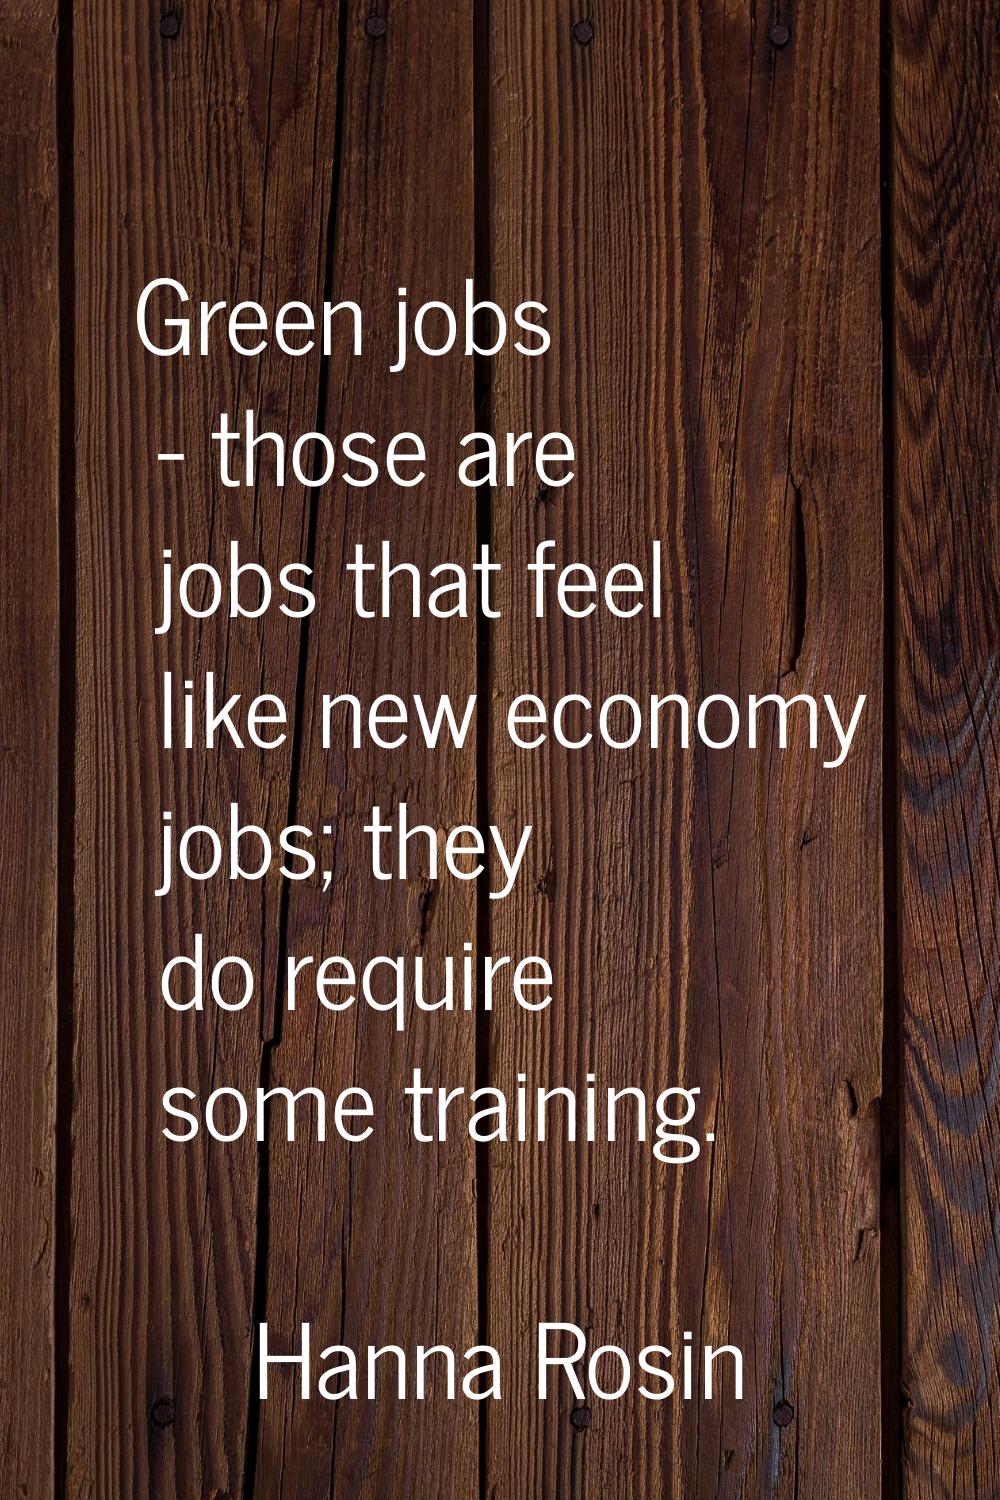 Green jobs - those are jobs that feel like new economy jobs; they do require some training.